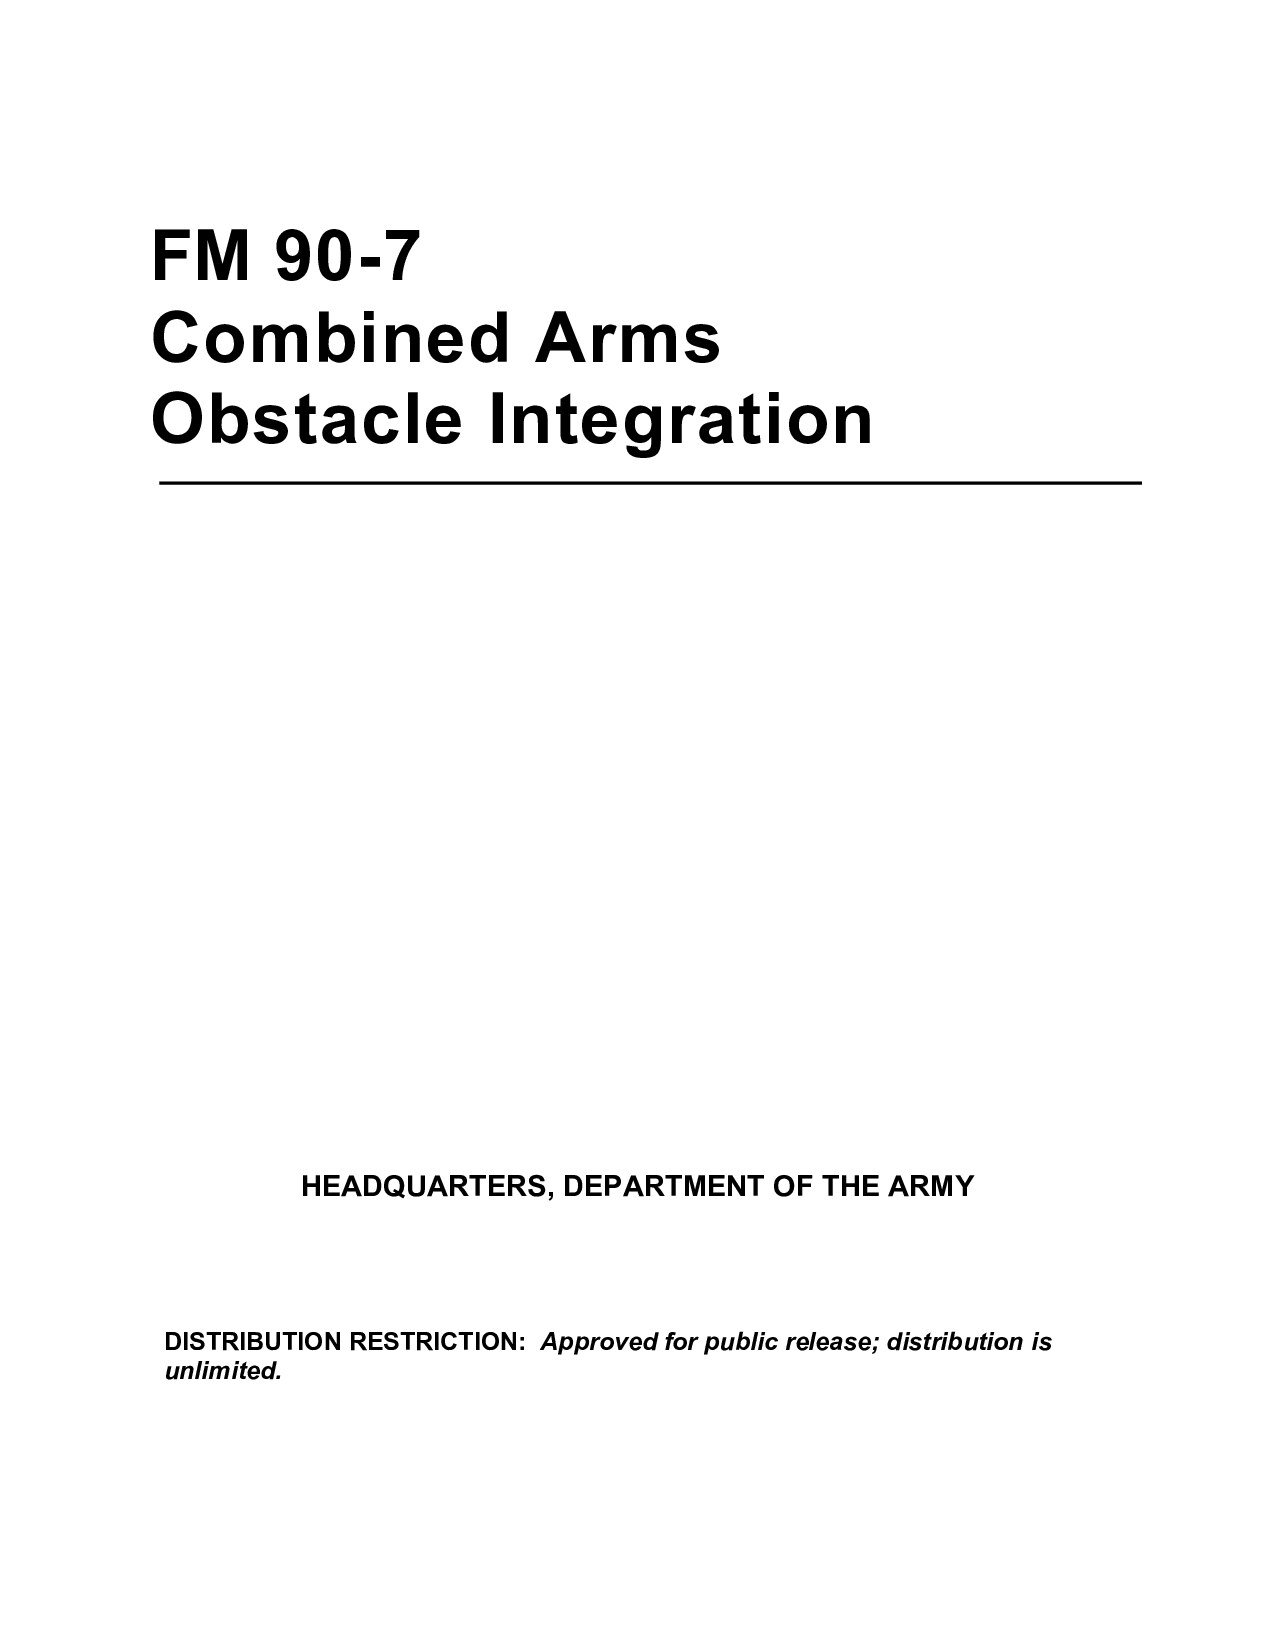 FM 90-7 Combined Arms Obstacle Integration